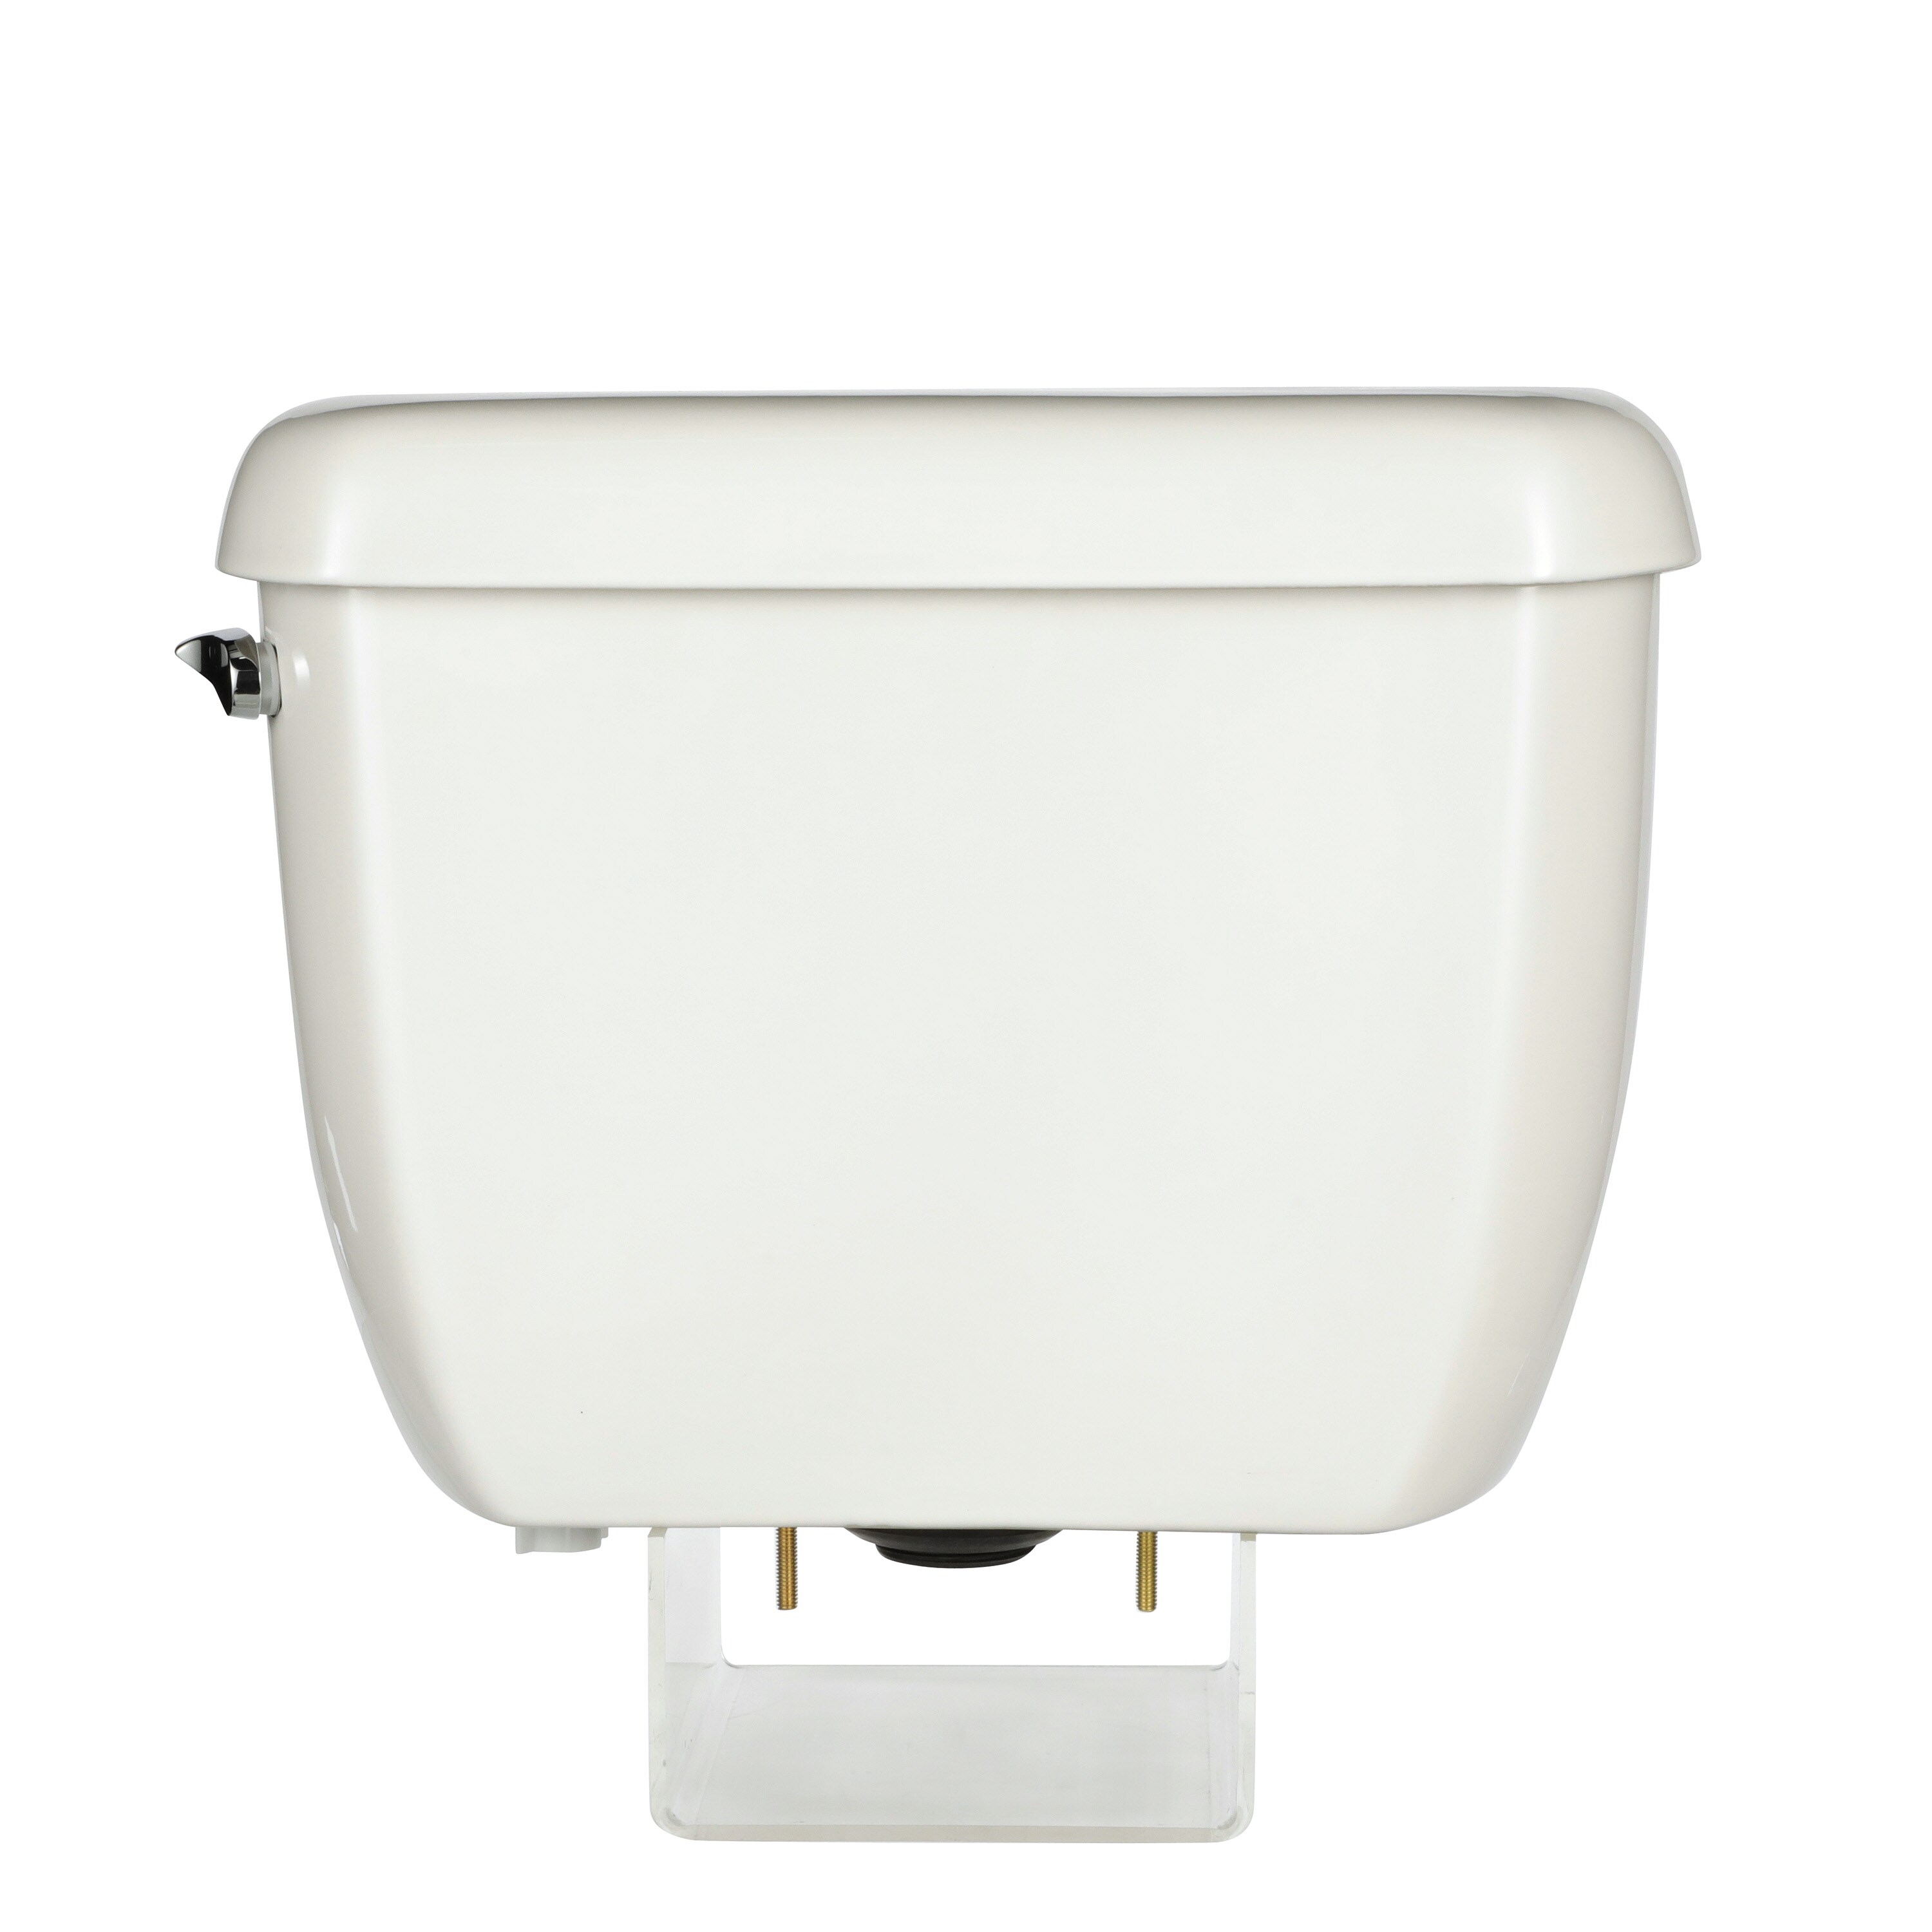 Toilet Seat WC Universal MDF White Stainless Steel Hinges Bathroom Cambridge 